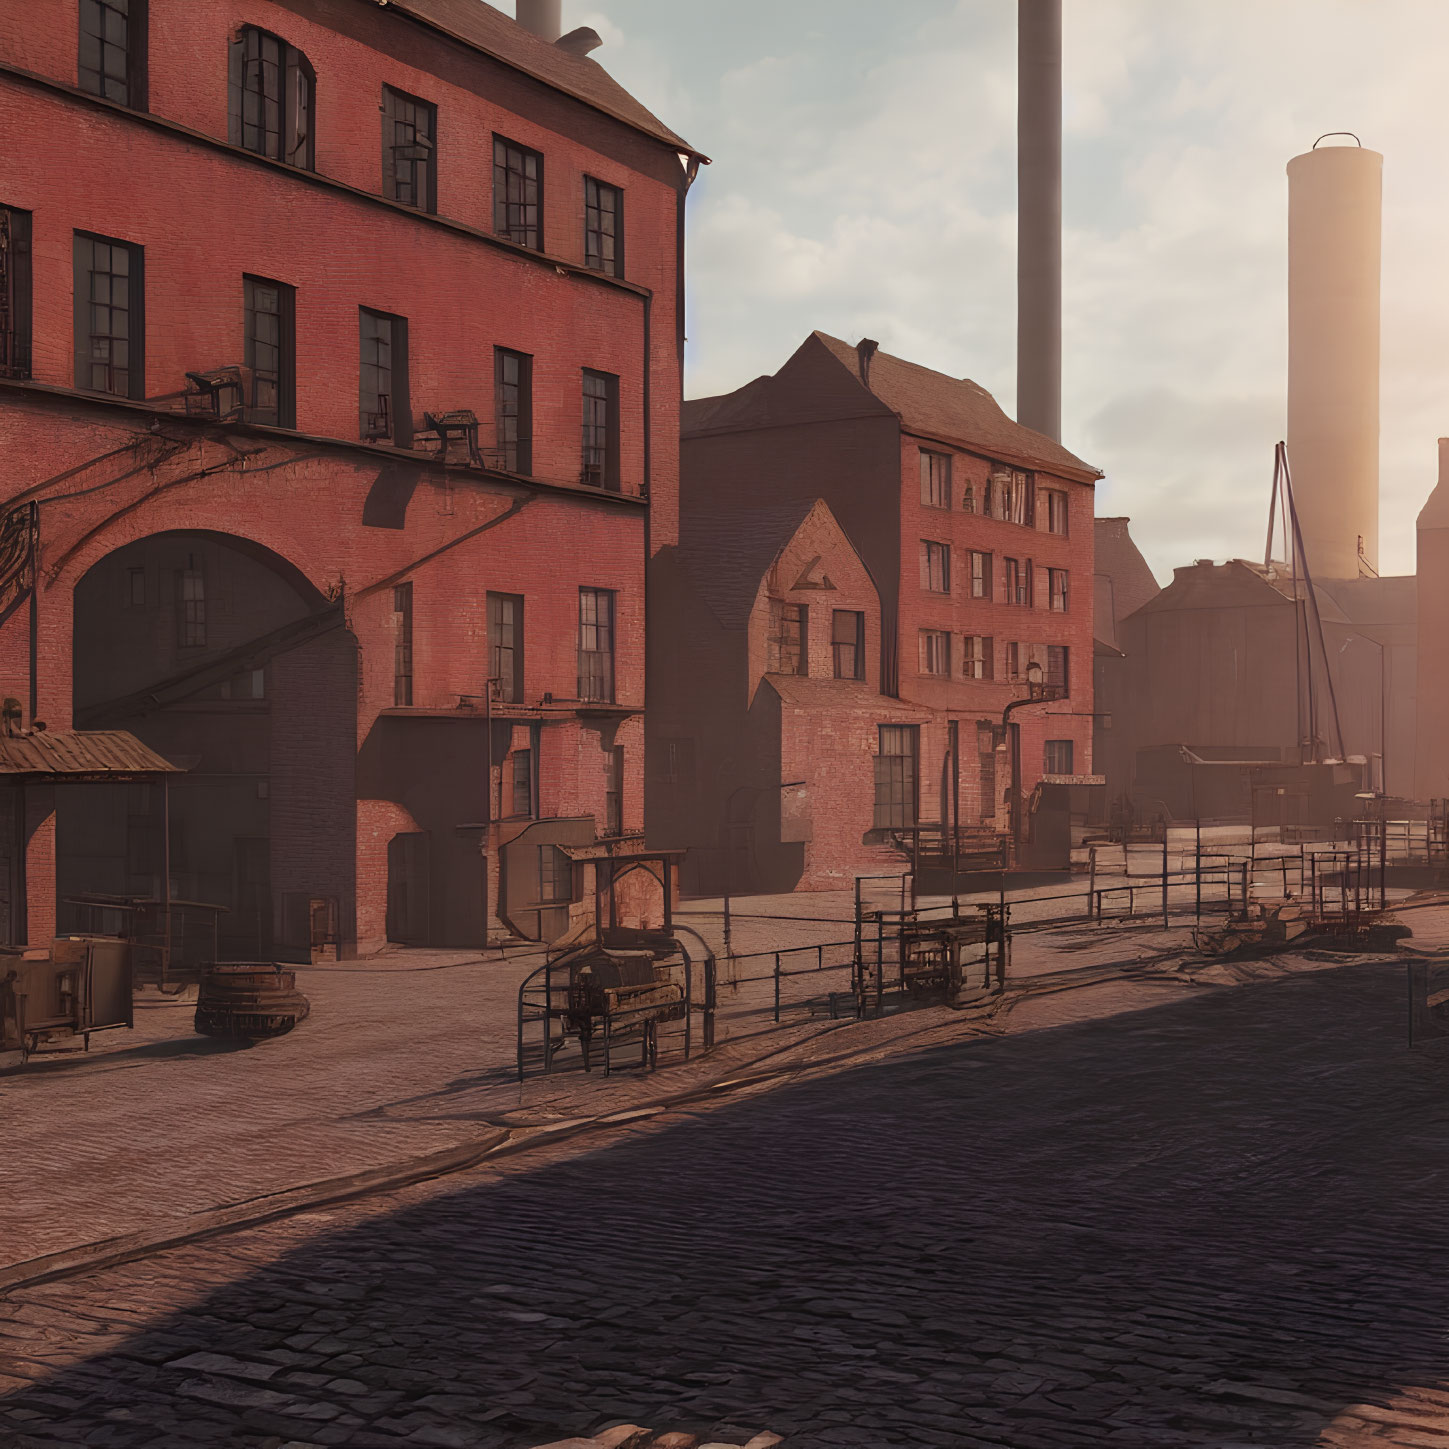 Brick buildings and smokestack at sunset in old industrial area